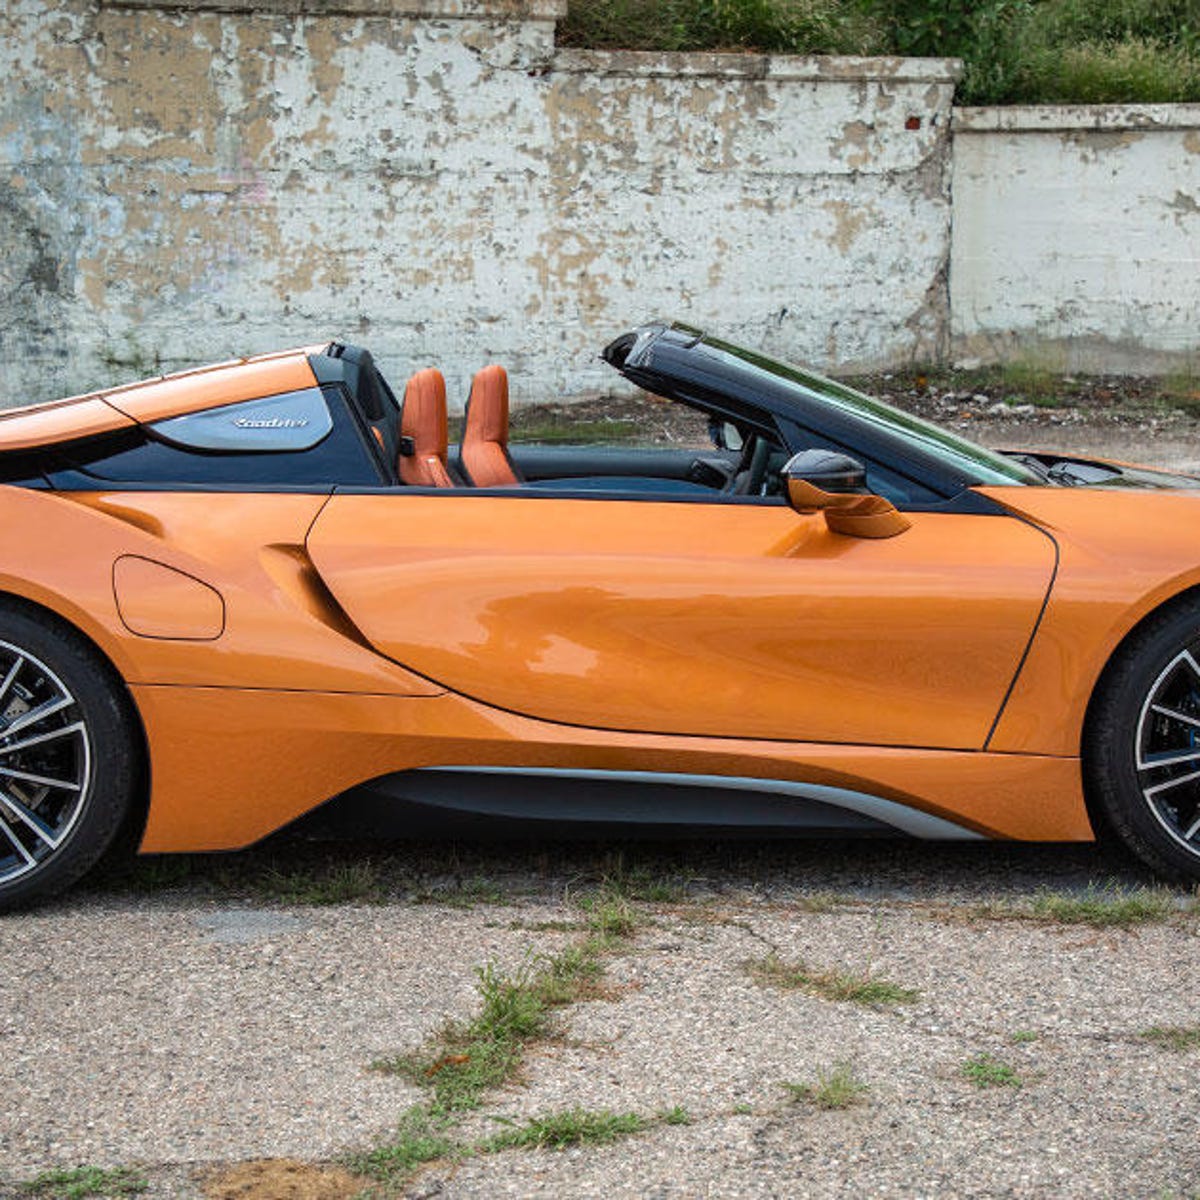 2019 BMW i8 Roadster review: Near-supercar performance, Instagrammable  style - CNET